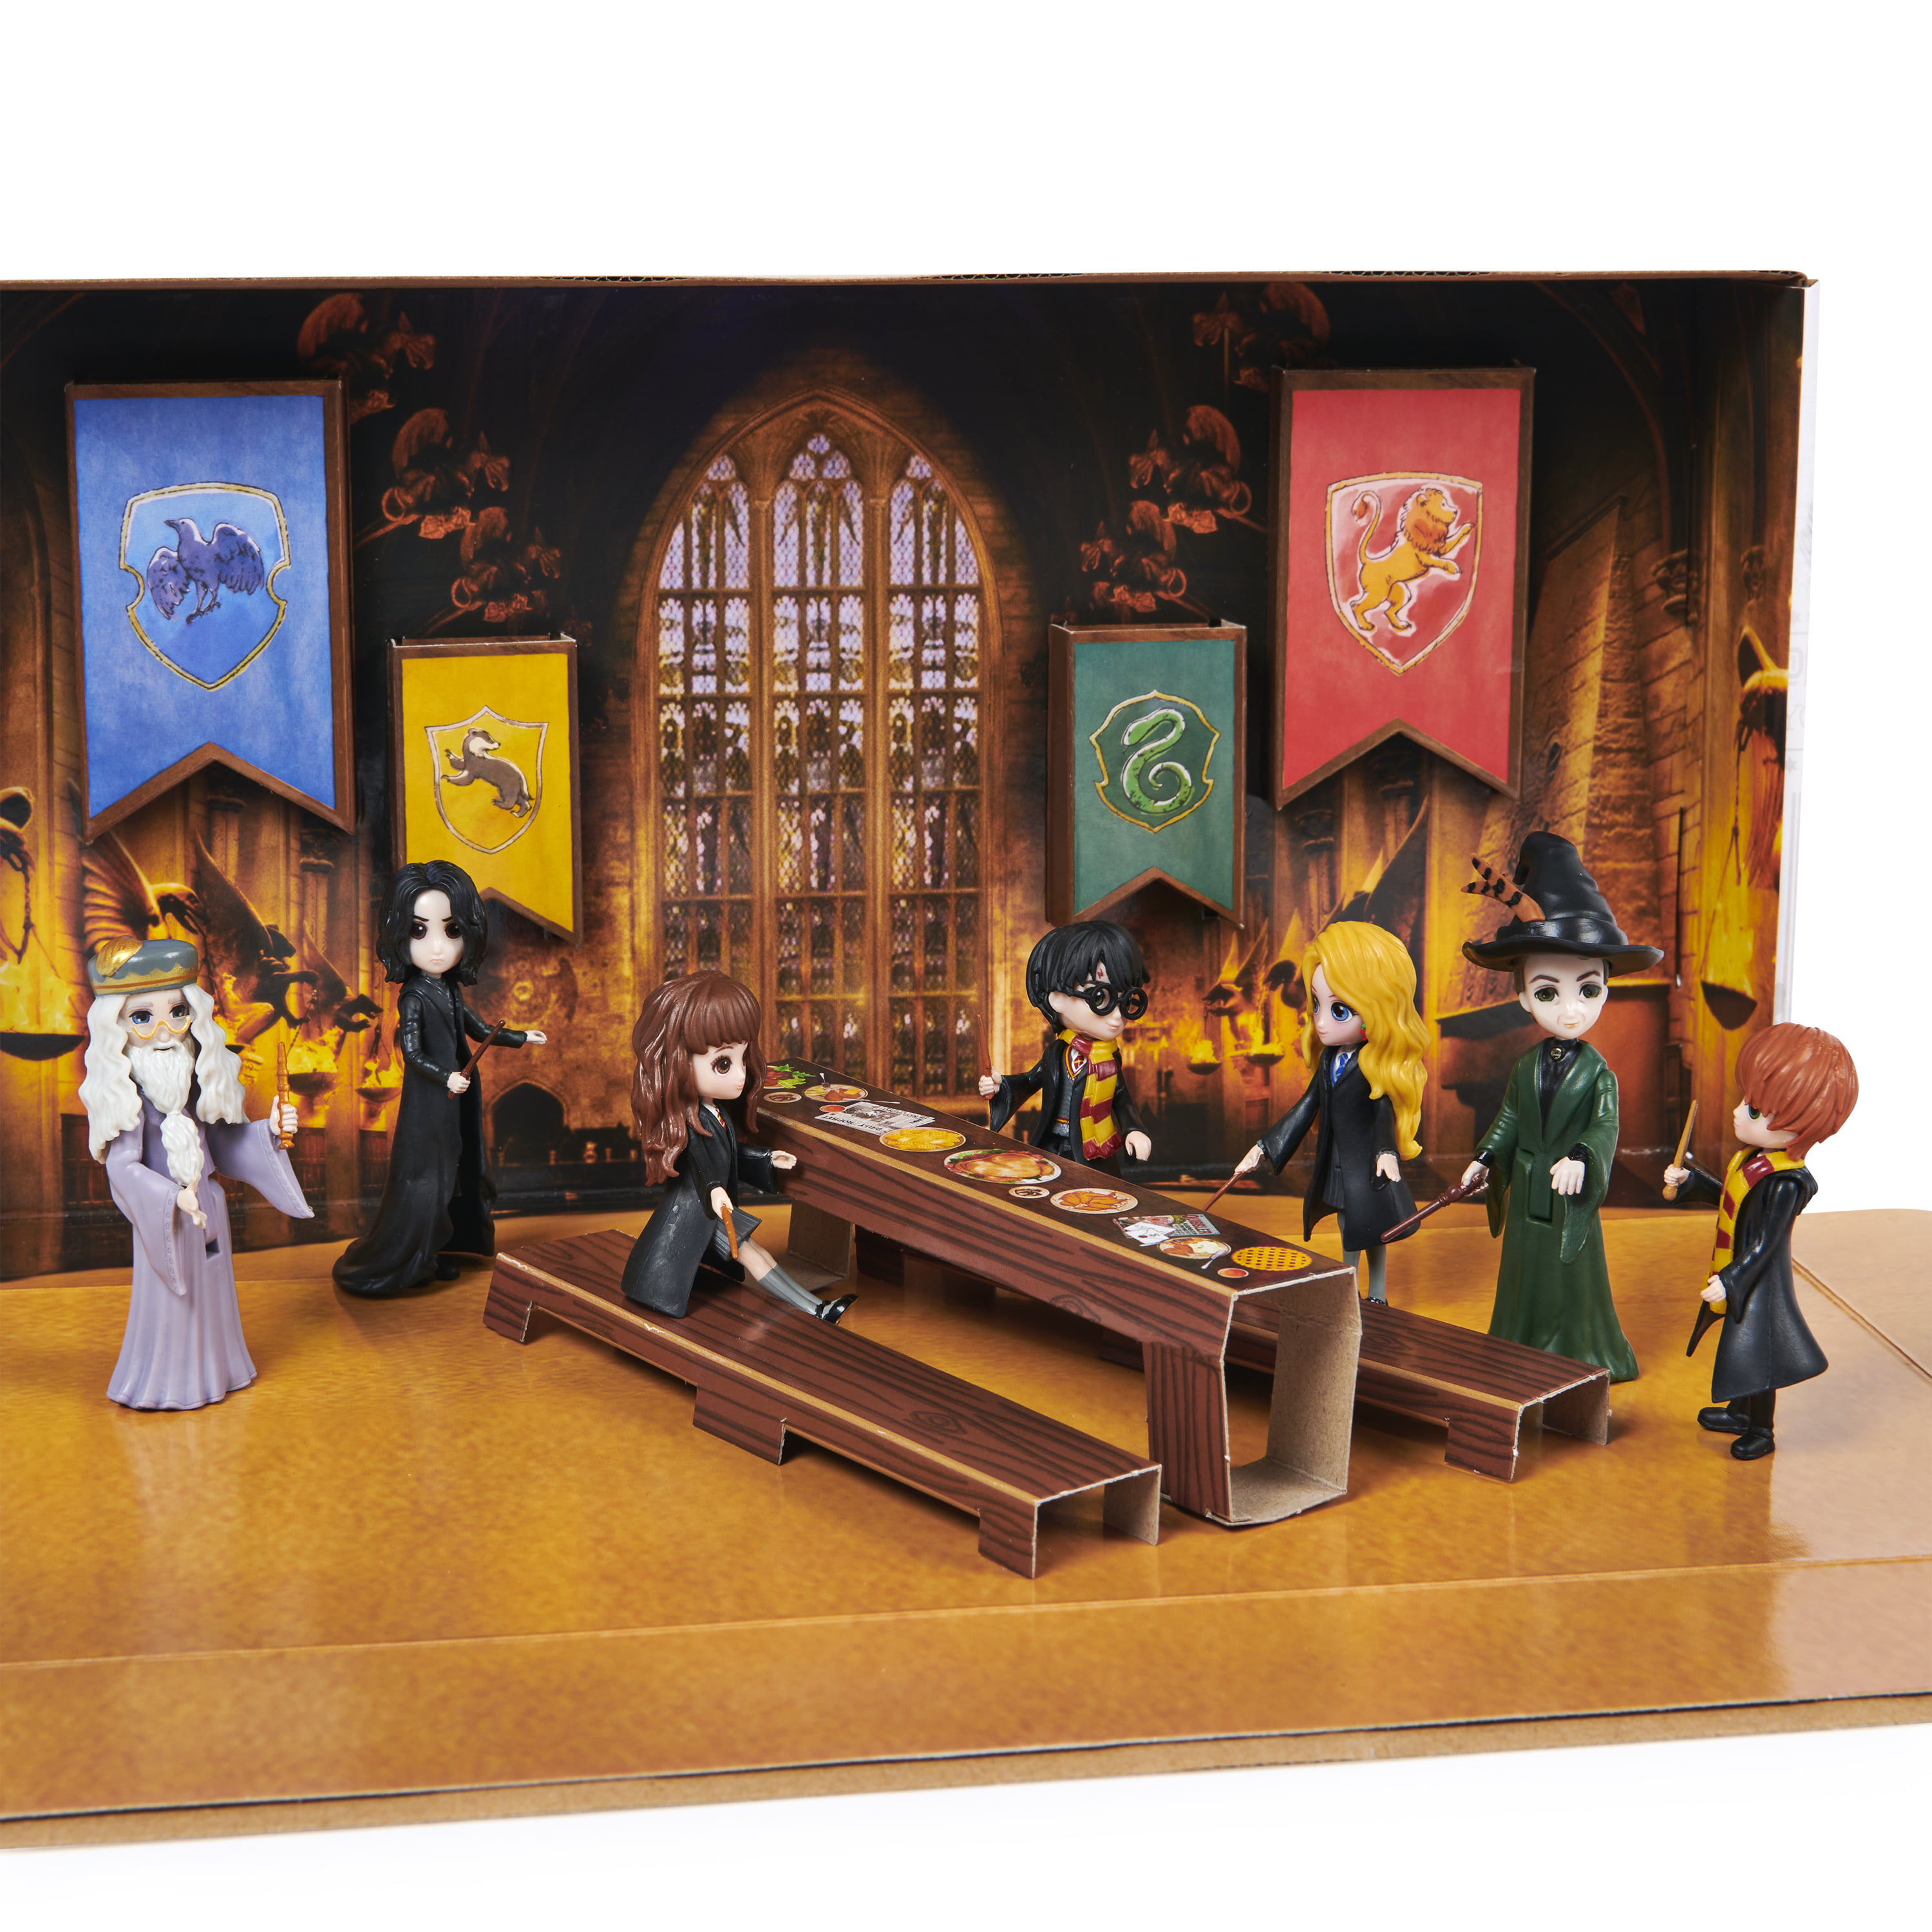 Coffret de 7 figurines - Magical Minis - Harry Potter Spin Master